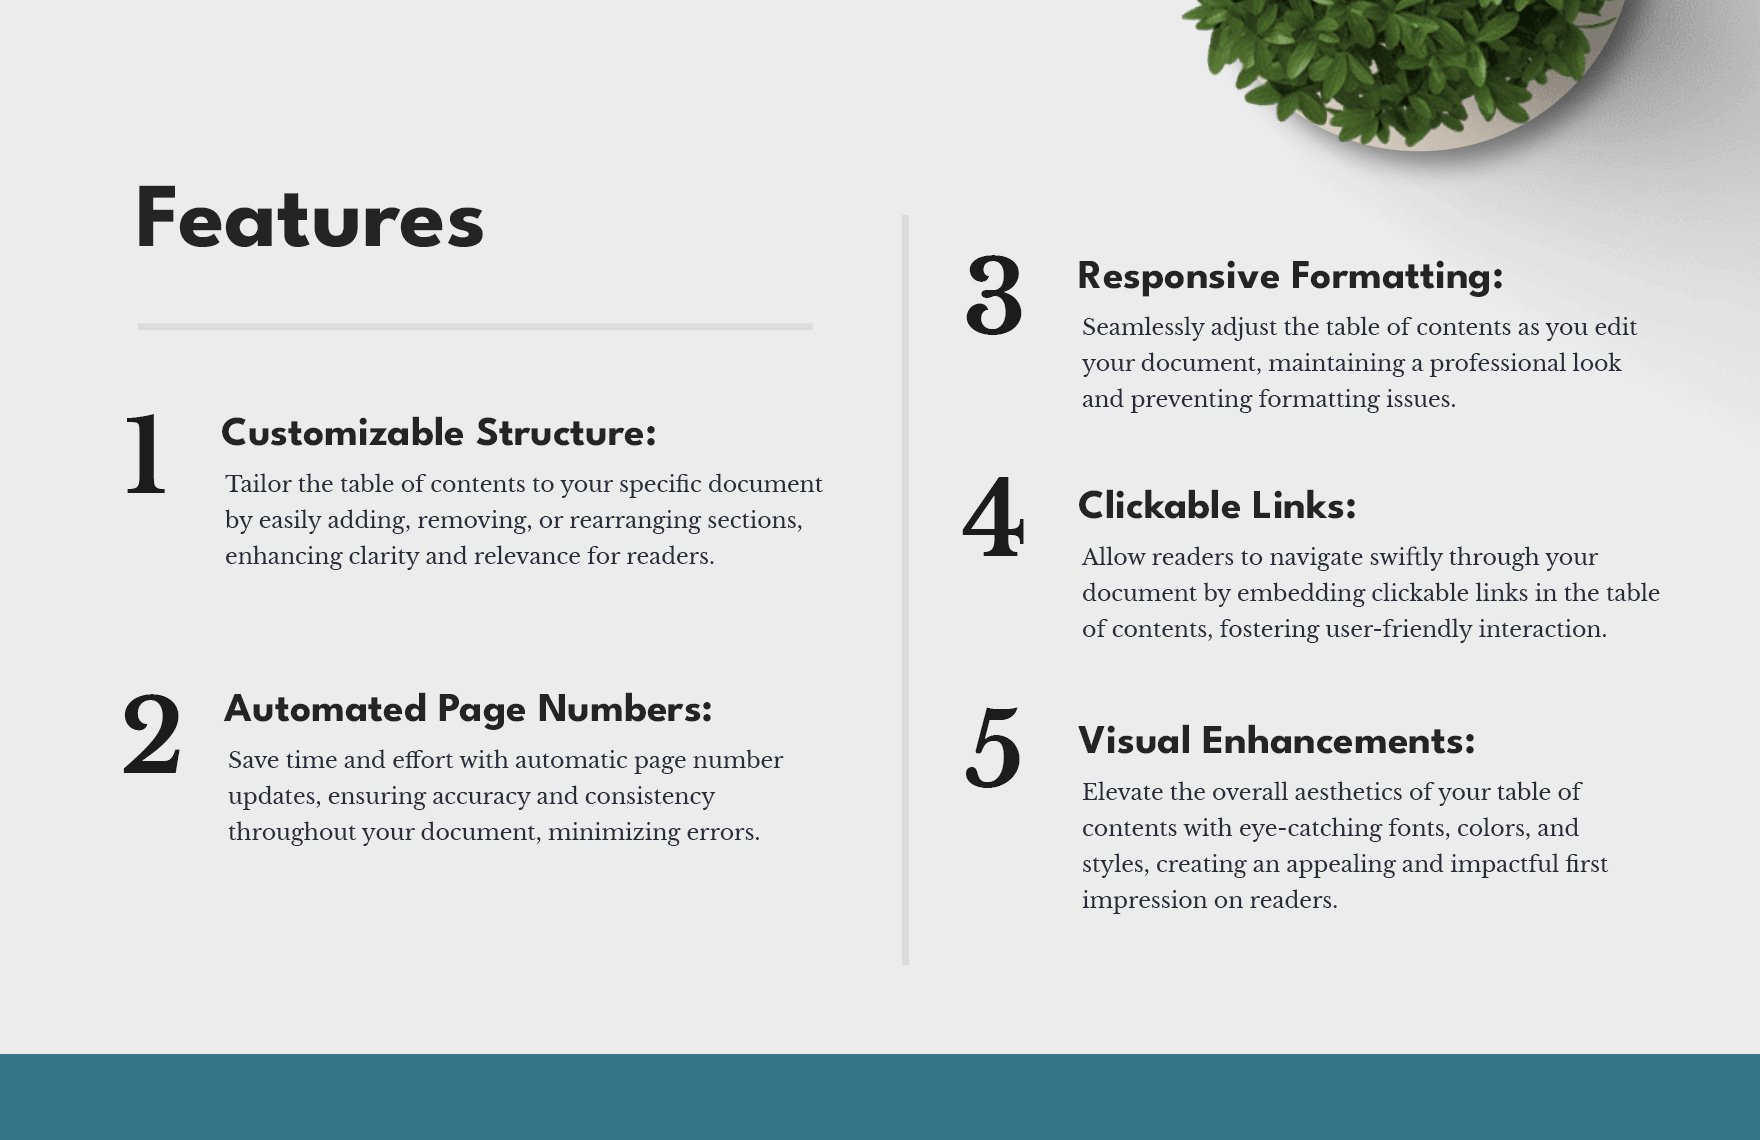 10+ Table of Contents Template Bundle